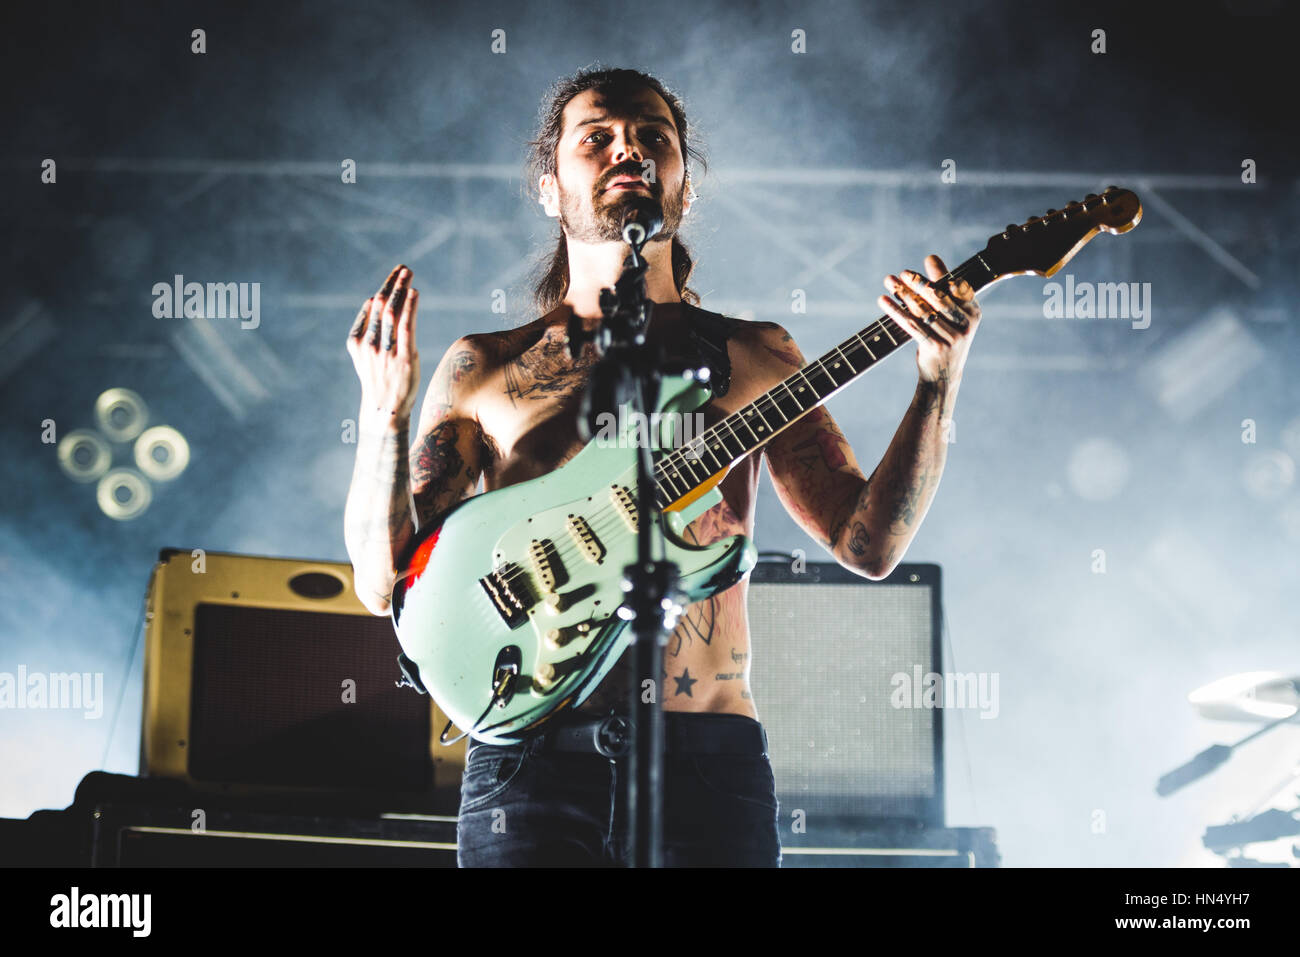 Padova, Italy. 07th Feb, 2017. Biffy Clyro performing live at Gran Teatro Geox in Padova for their 'Ellipsis' tour 2017 concert. Credit: Alessandro Bosio/Pacific Press/Alamy Live News Stock Photo